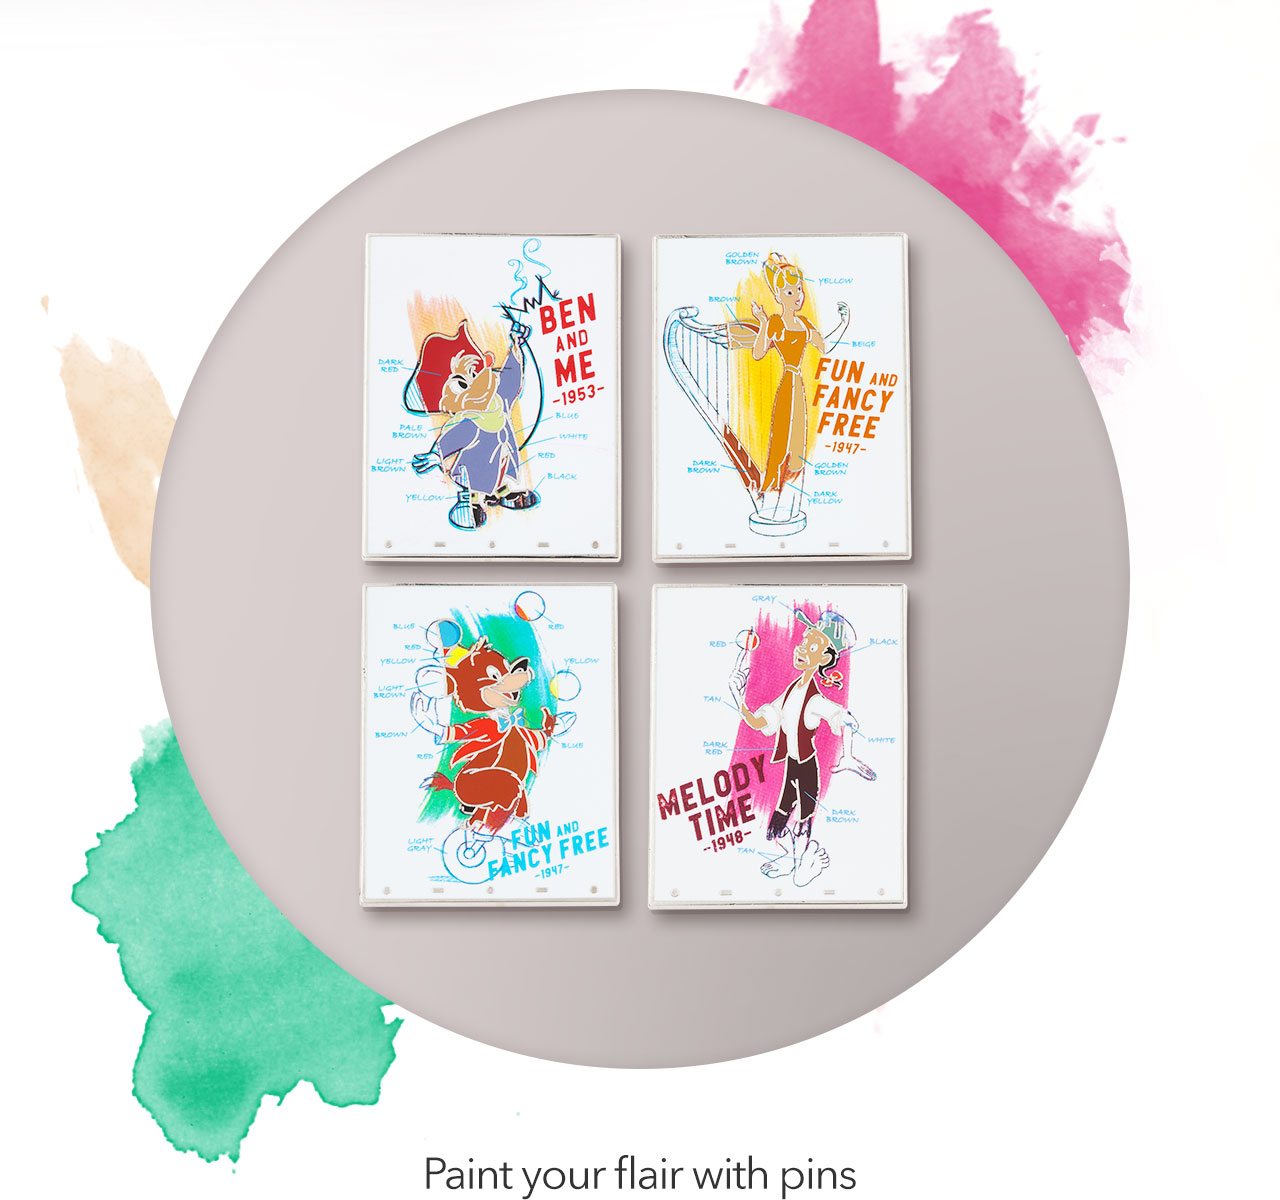 Paint your flair with pins